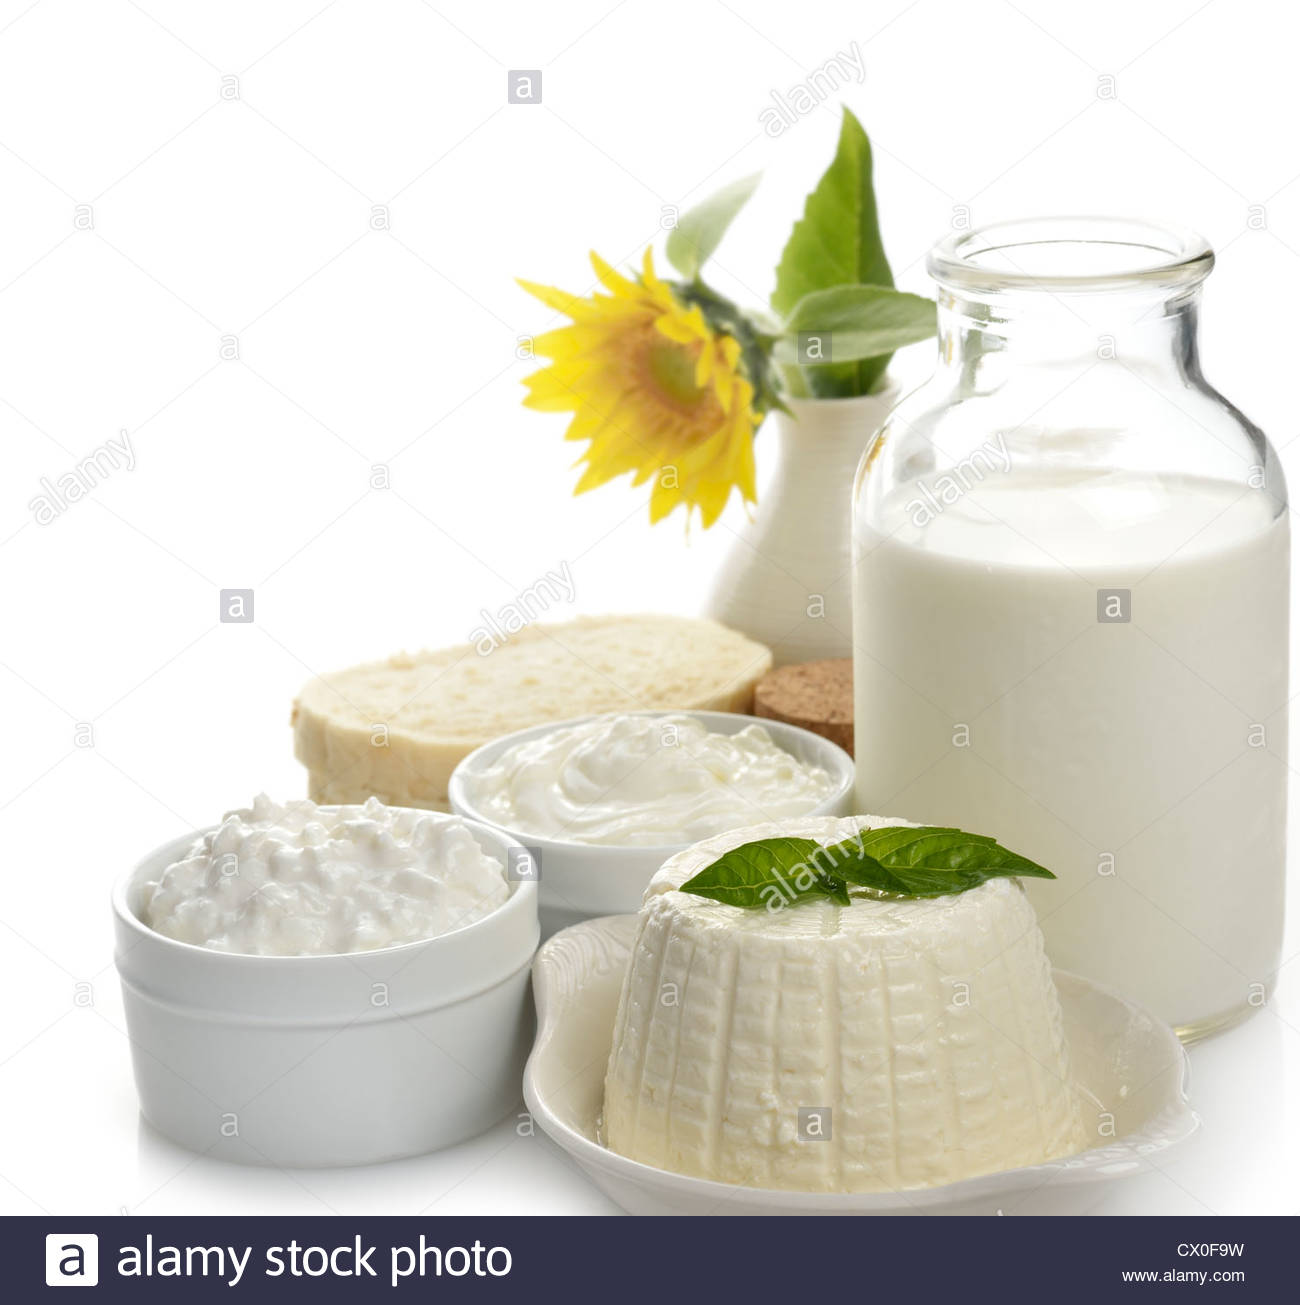 Dairy Products On White Background Stock Photo